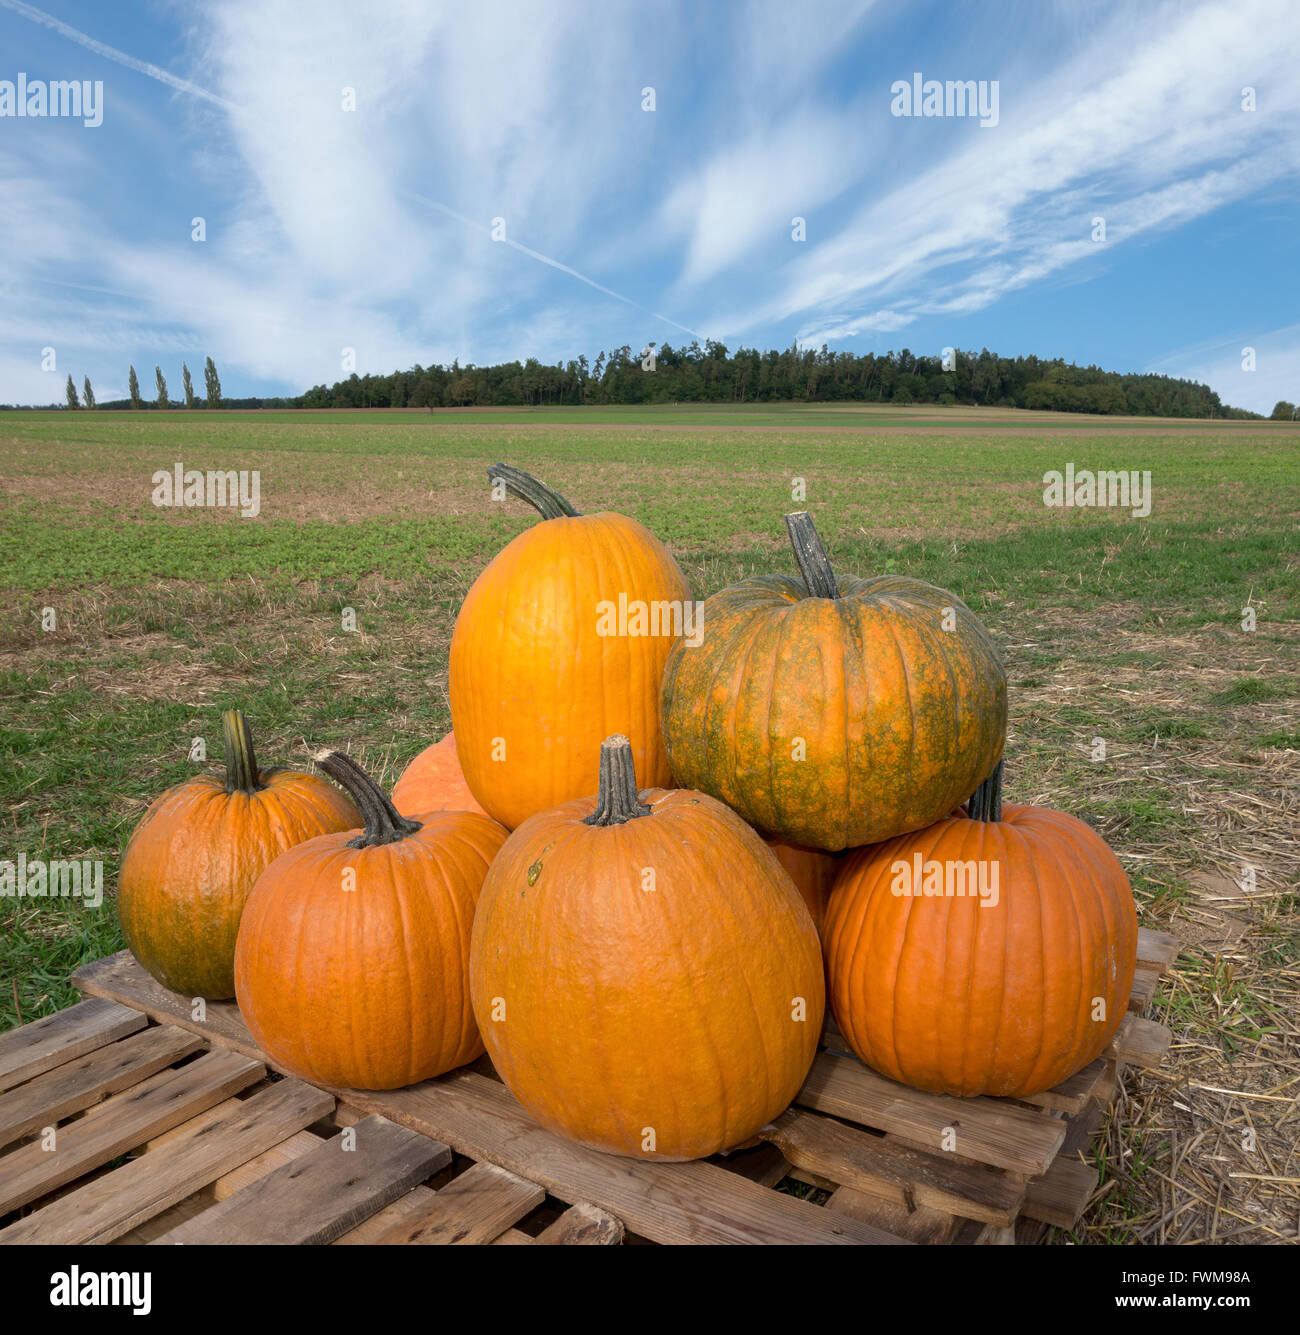 Several big orange pumpkins lay on a pallet at a field in rural landscape. Stock Photo